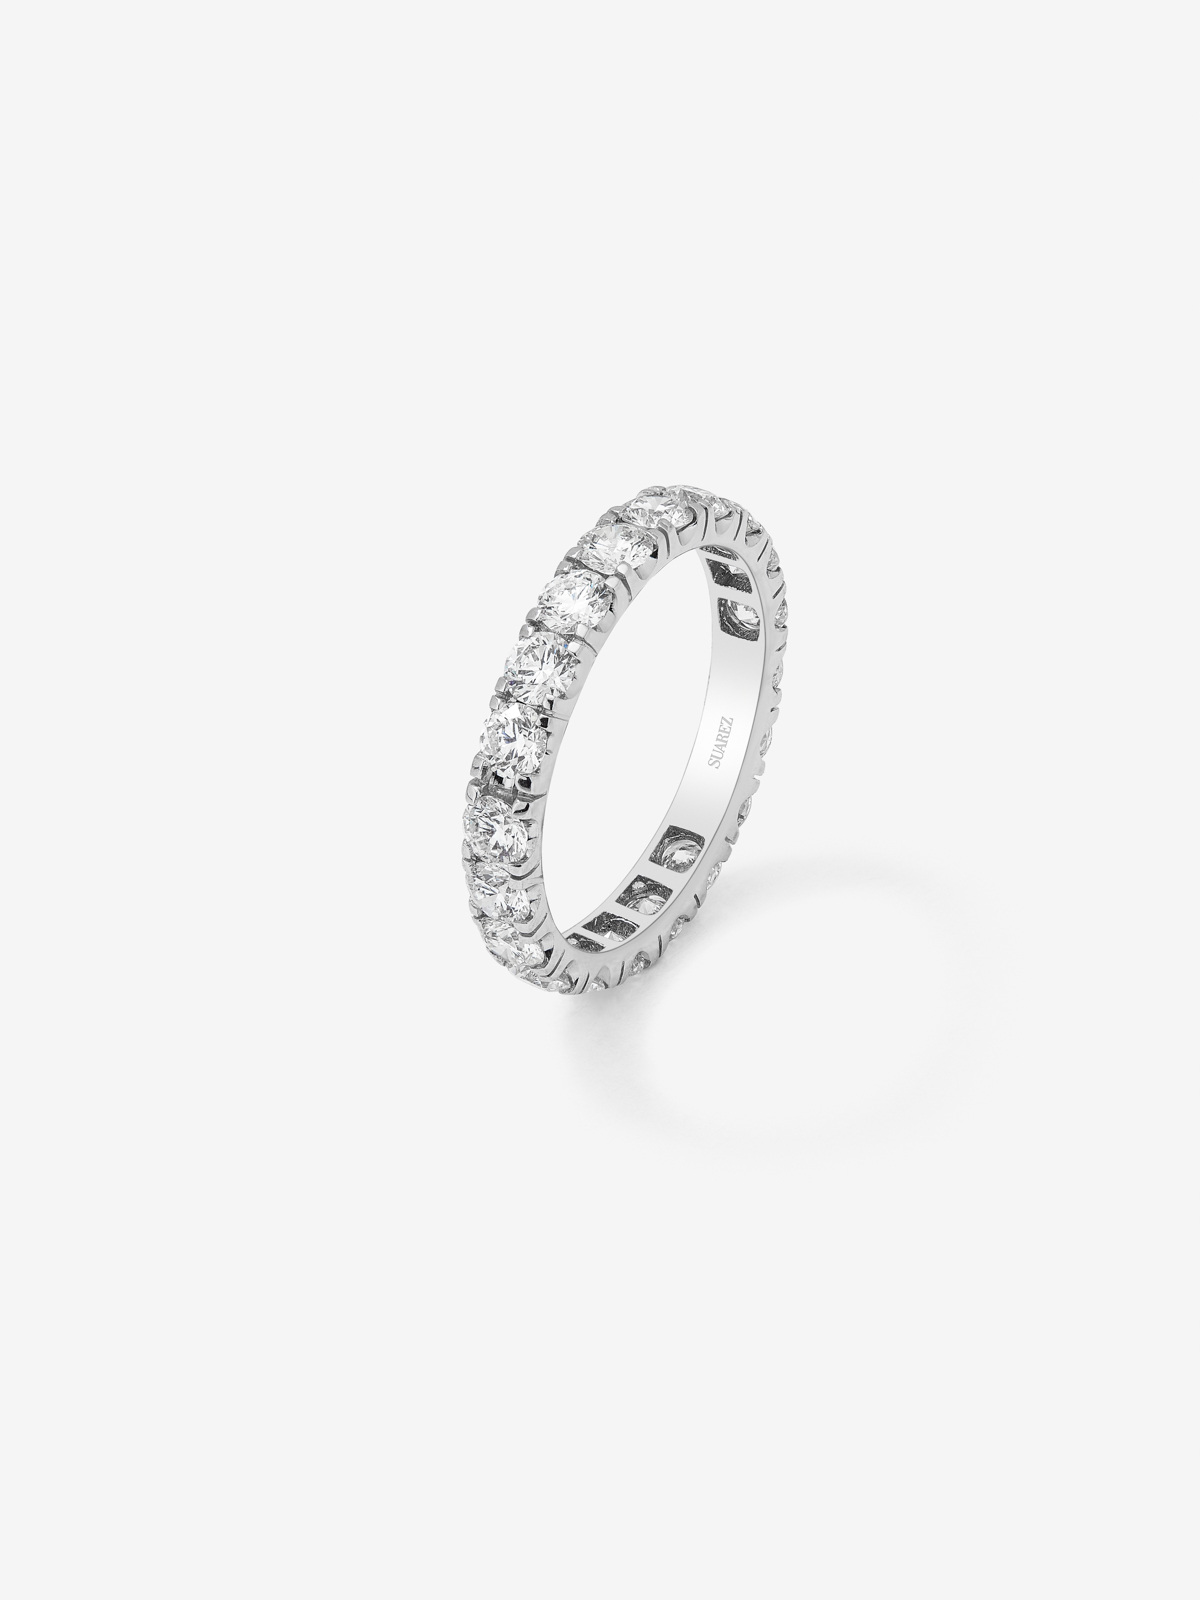 18K white gold full eternity engagement ring with claw-set diamonds